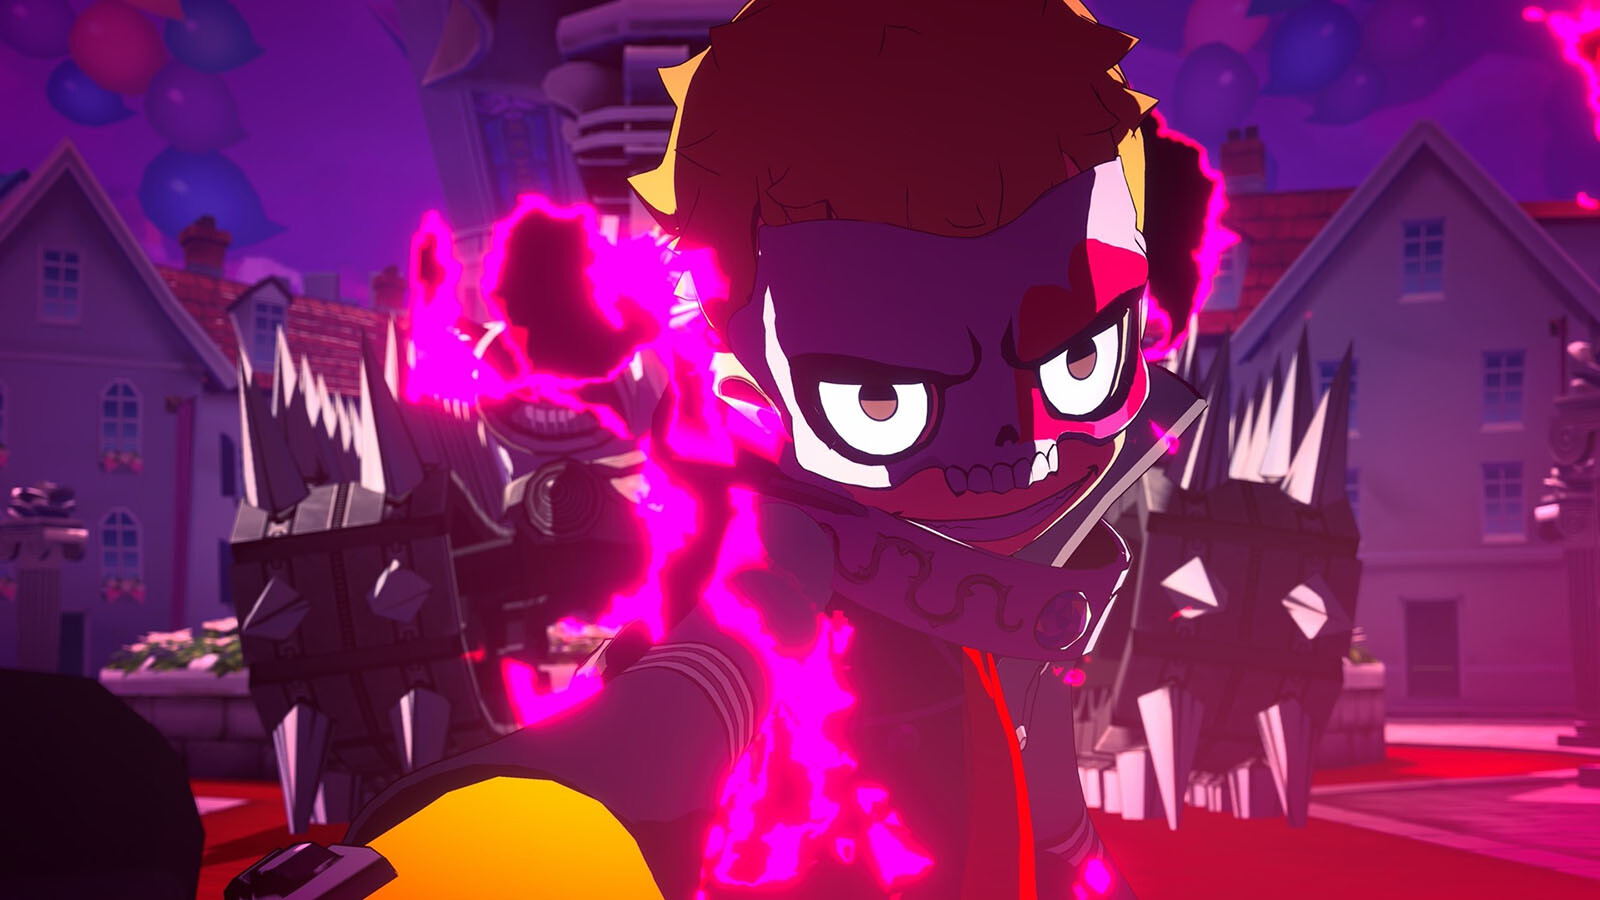 Persona 5 Tactica Steam Key for PC - Buy now